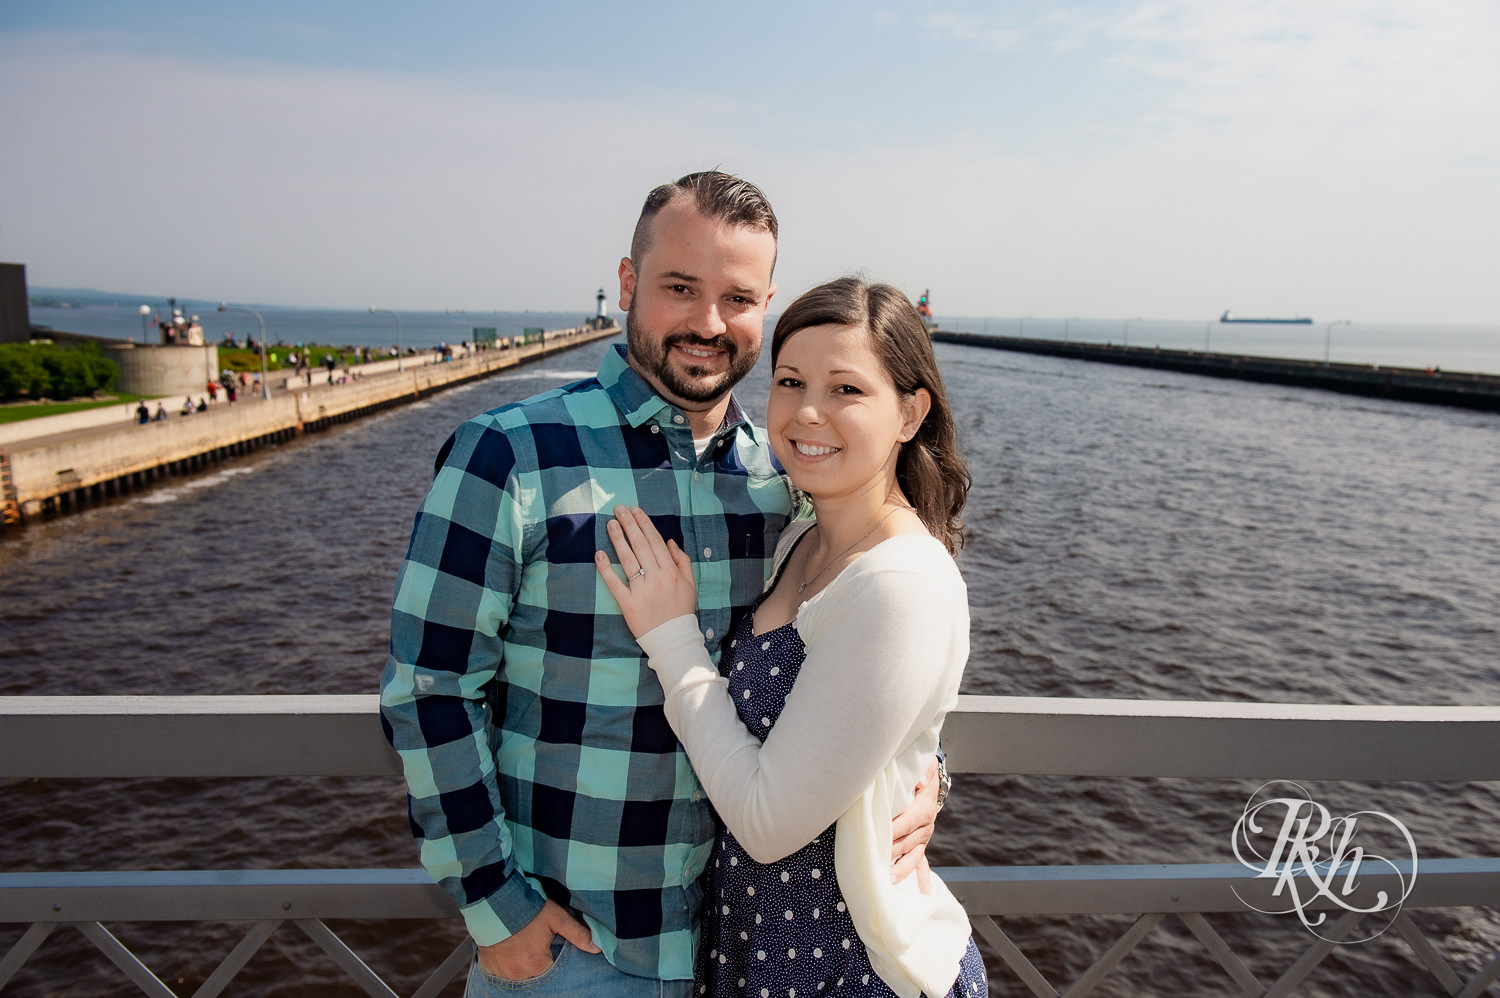 Man and woman smile with Lake Superior in the background in Duluth, Minnesota.